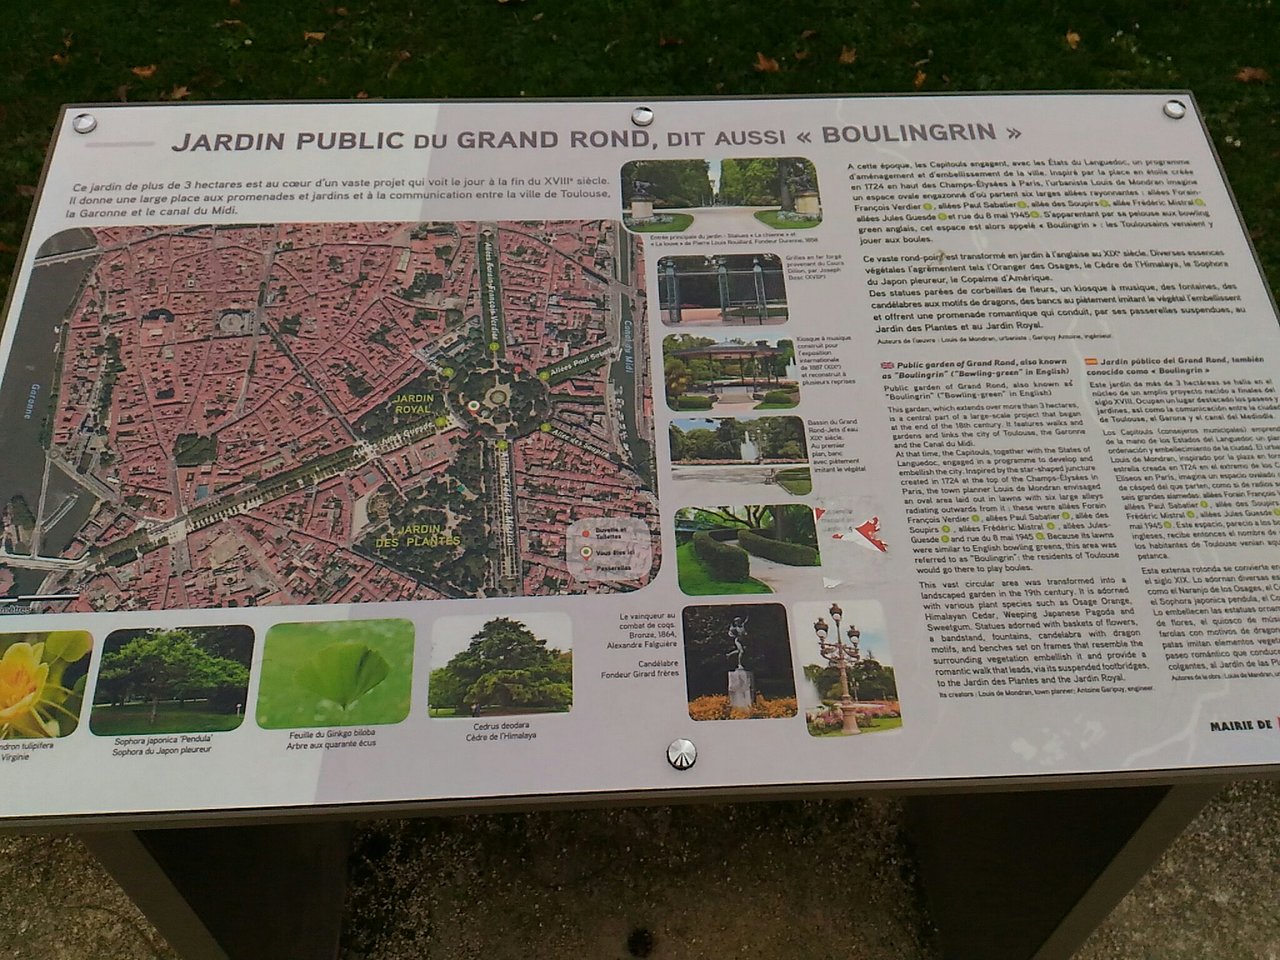 Le Jardin Des Plantes toulouse Beau Jardin Du Grand Rond toulouse 2020 All You Need to Know